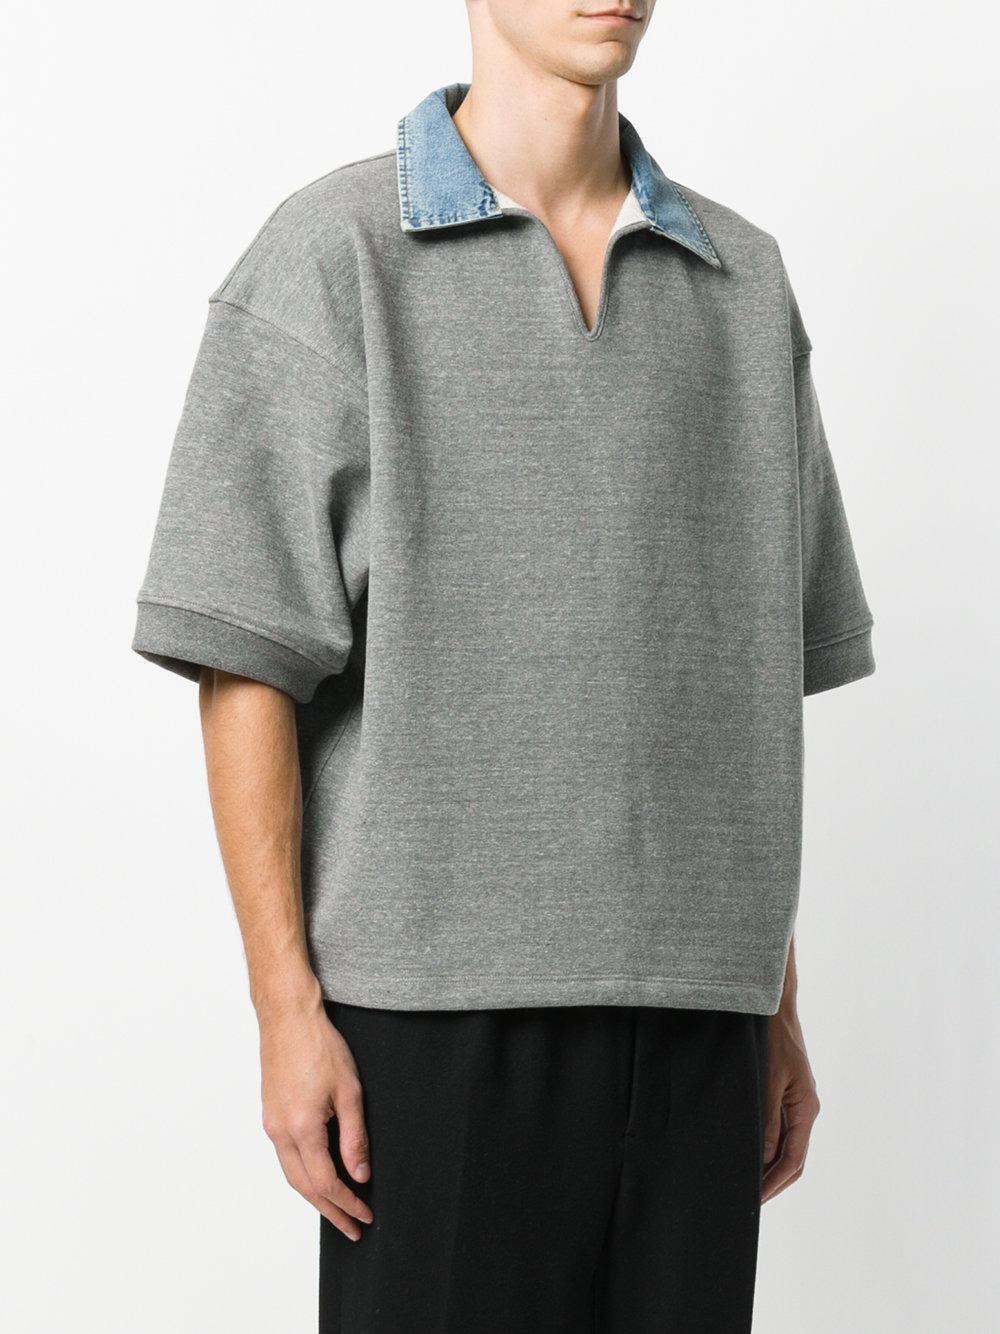 Fear Of God Cotton Oversized Polo Shirt in Grey (Gray) for Men - Lyst